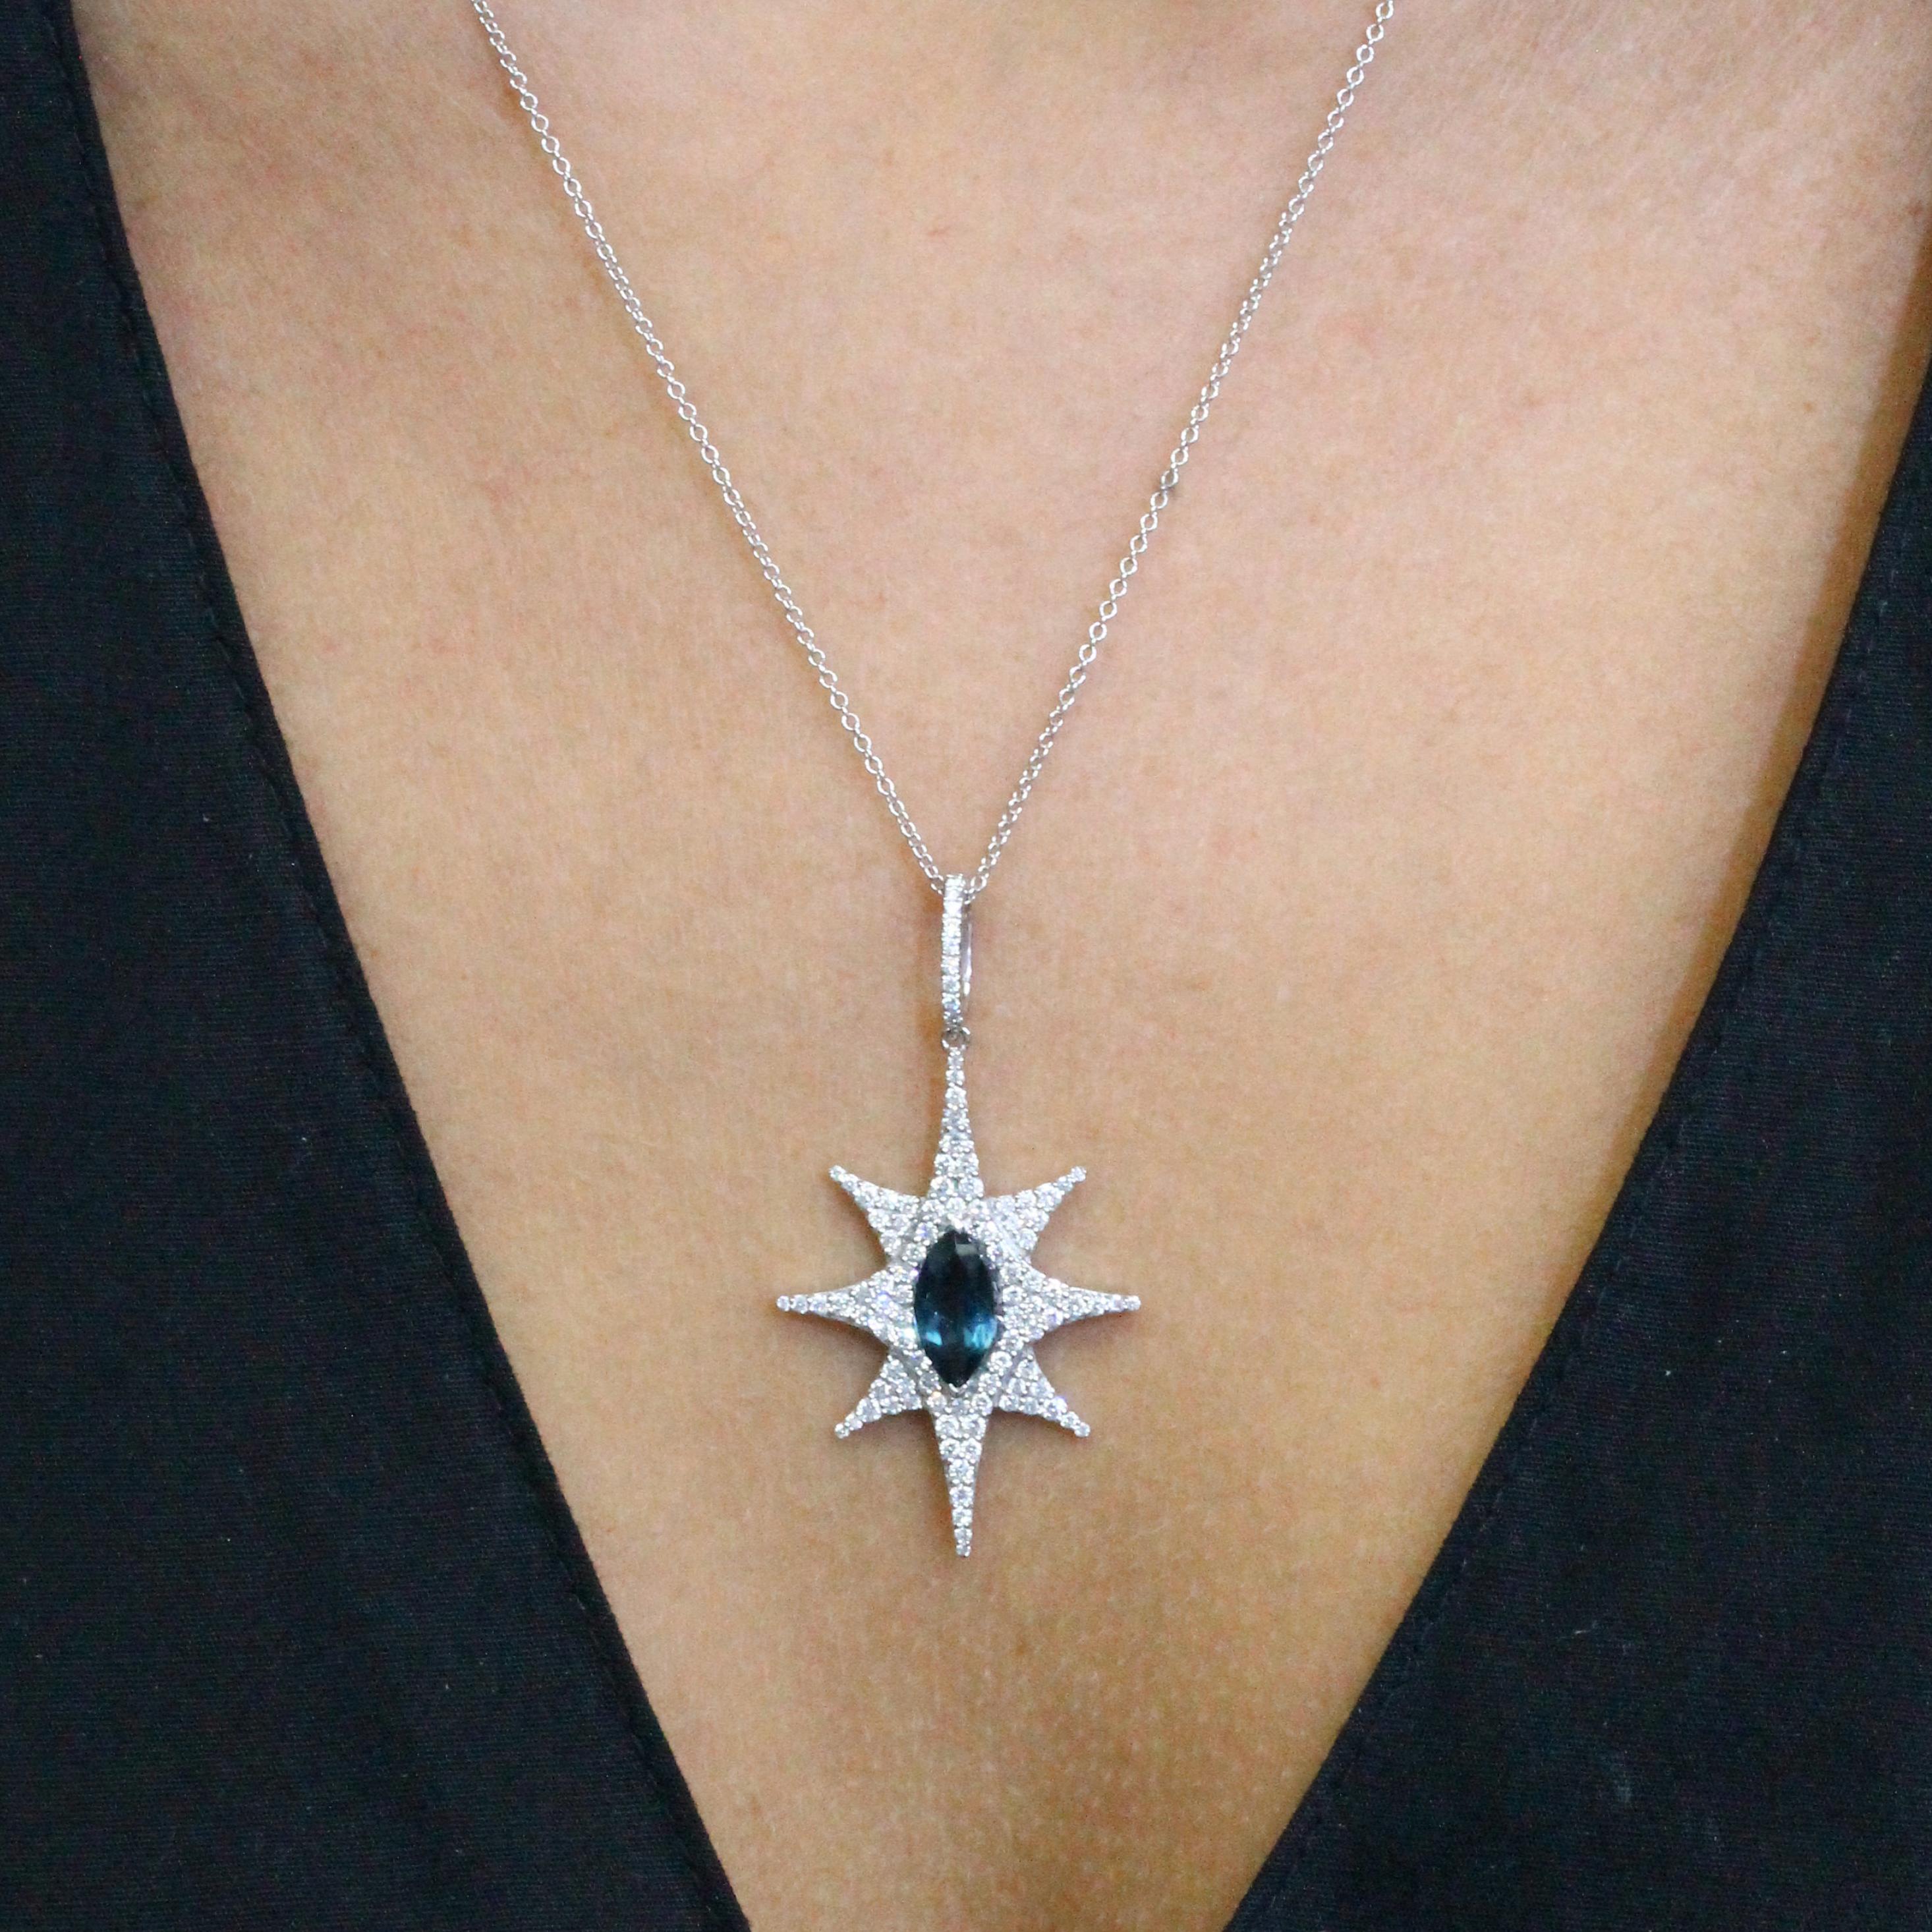 18K White Gold Star Necklace featuring Marquise, prong-set London Blue Topaz, and Diamond Pave, hanging on an 18-inch 18K Cable Chain, with 16-inch adjuster ring. One-of-a-kind necklace. Item ref. P8089LBT-1.

♦ Behind the Stone ♦
- London Blue